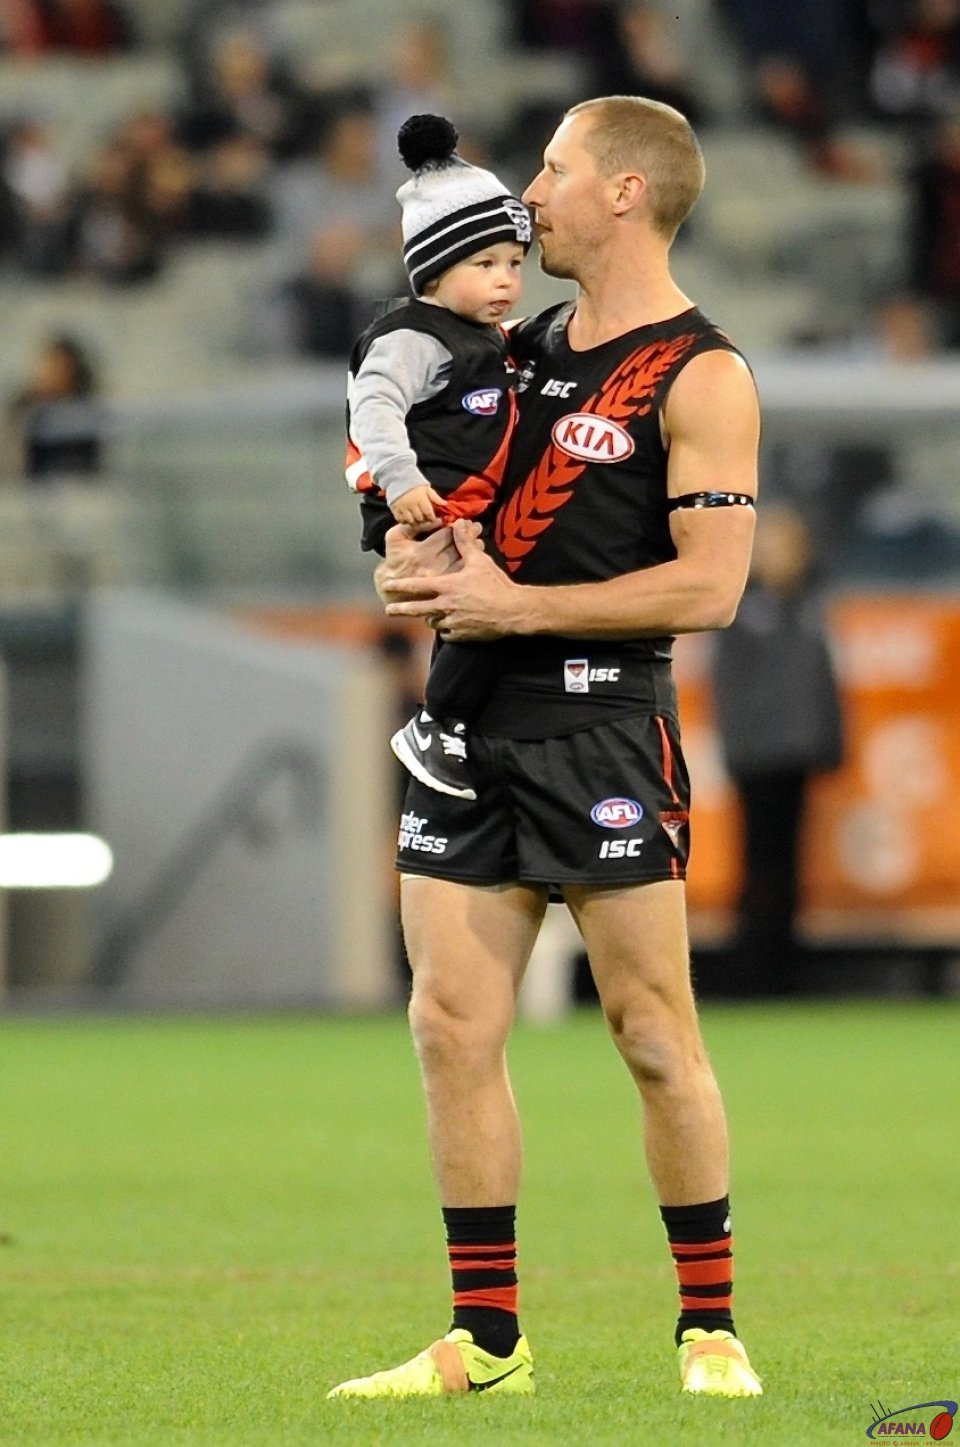 James Kelly with his child